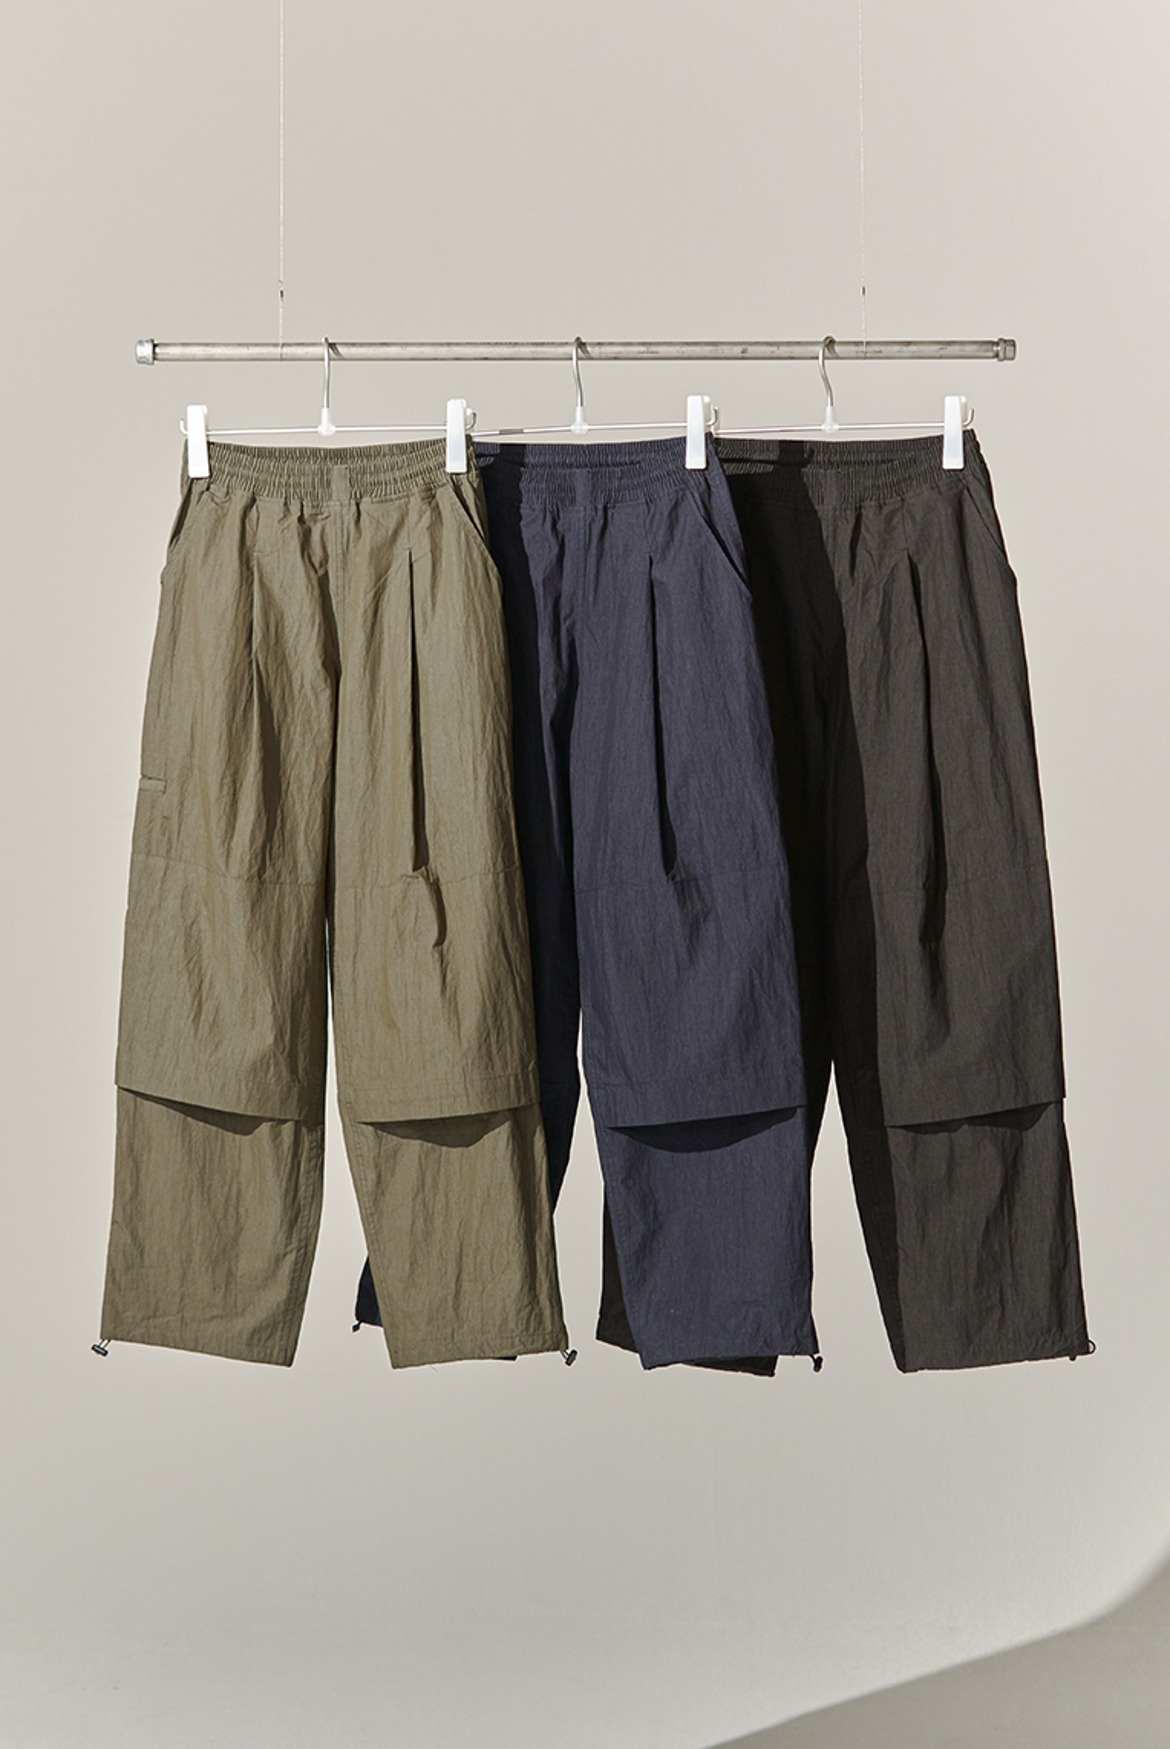 Double Knee Vertical String Banding Pants [3 Colors]